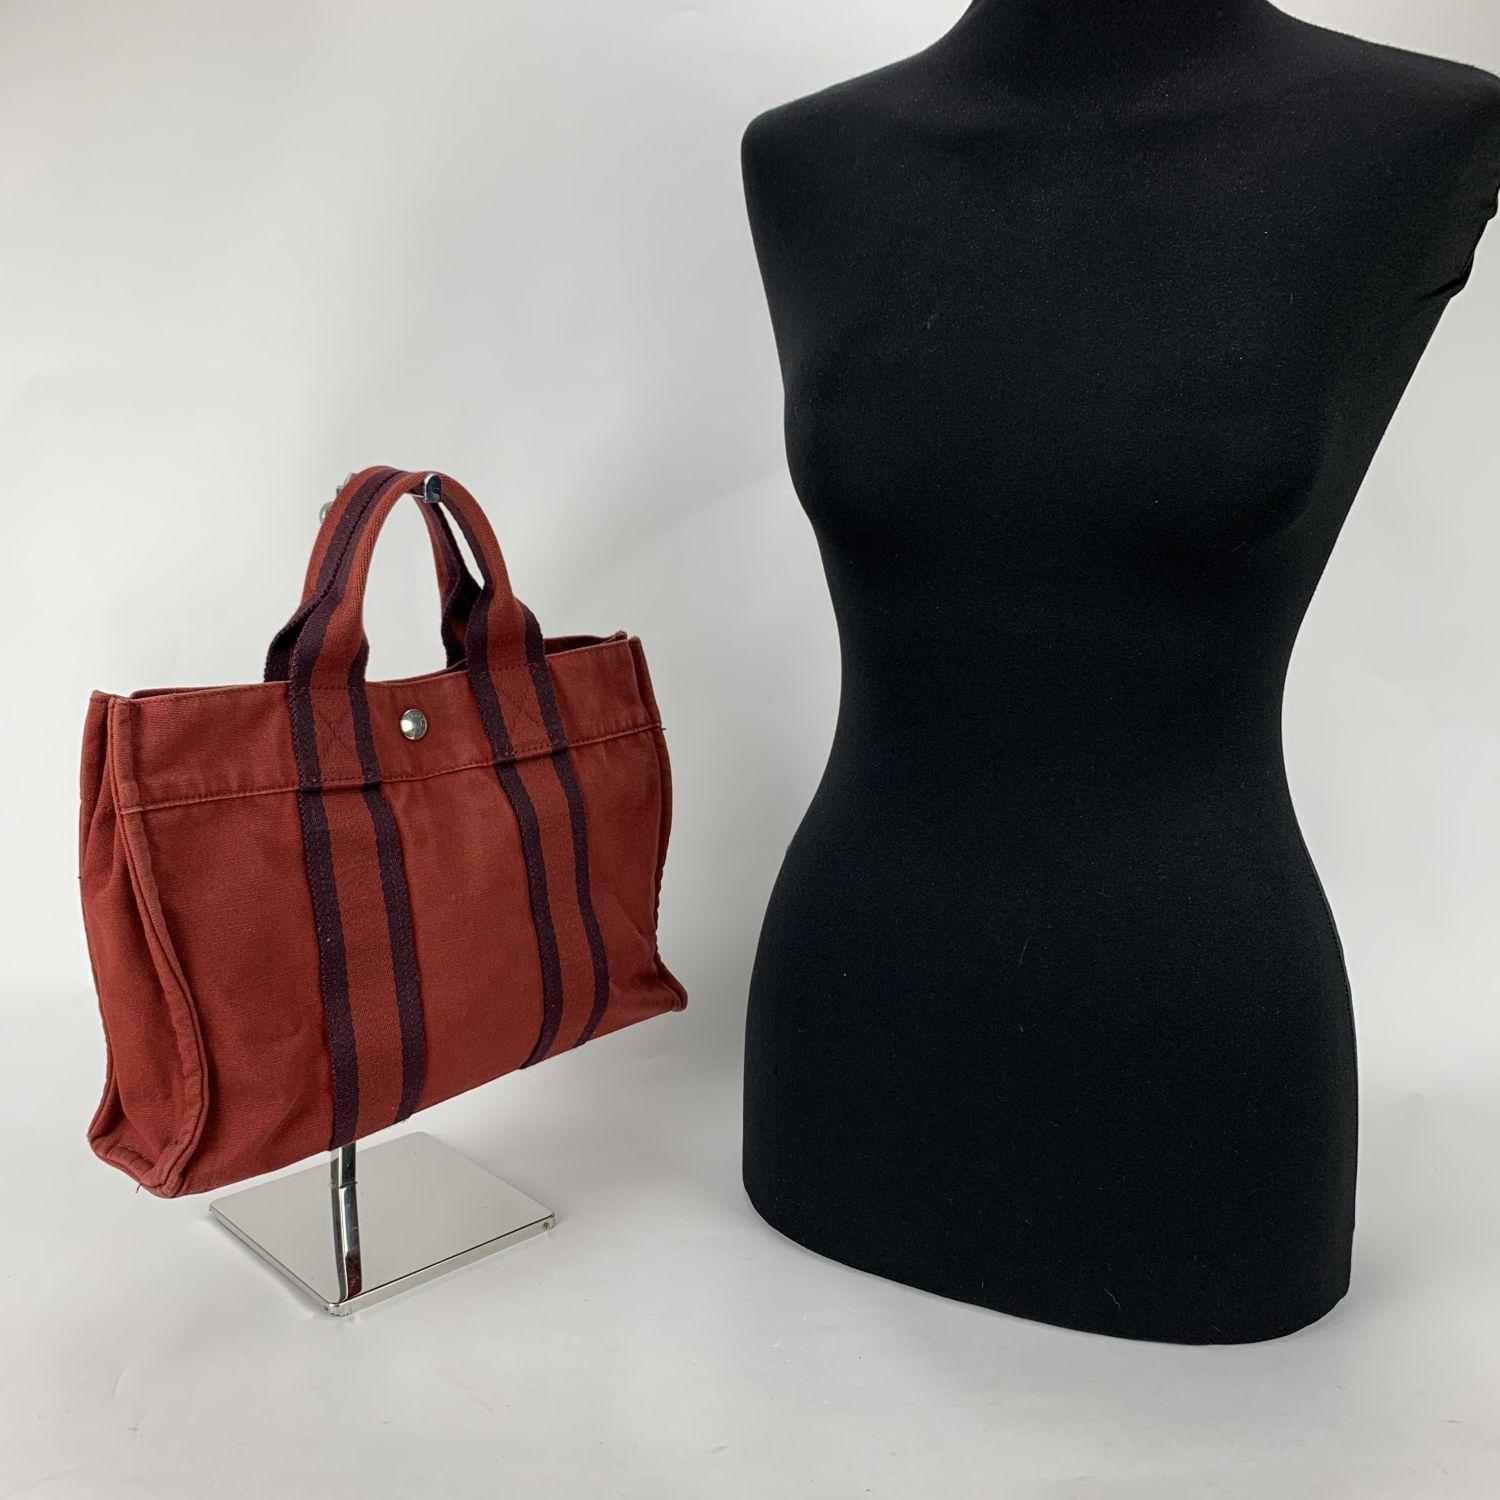 Model: 'HERMES FOURRE TOUT - PM' Tote handbag. Made in France. Red color with blue stripes. Material: 100% cotton. It has snaps on both ends for expansion. Durable canvas handles, perfect for casual and everyday use. Open top with middle snap